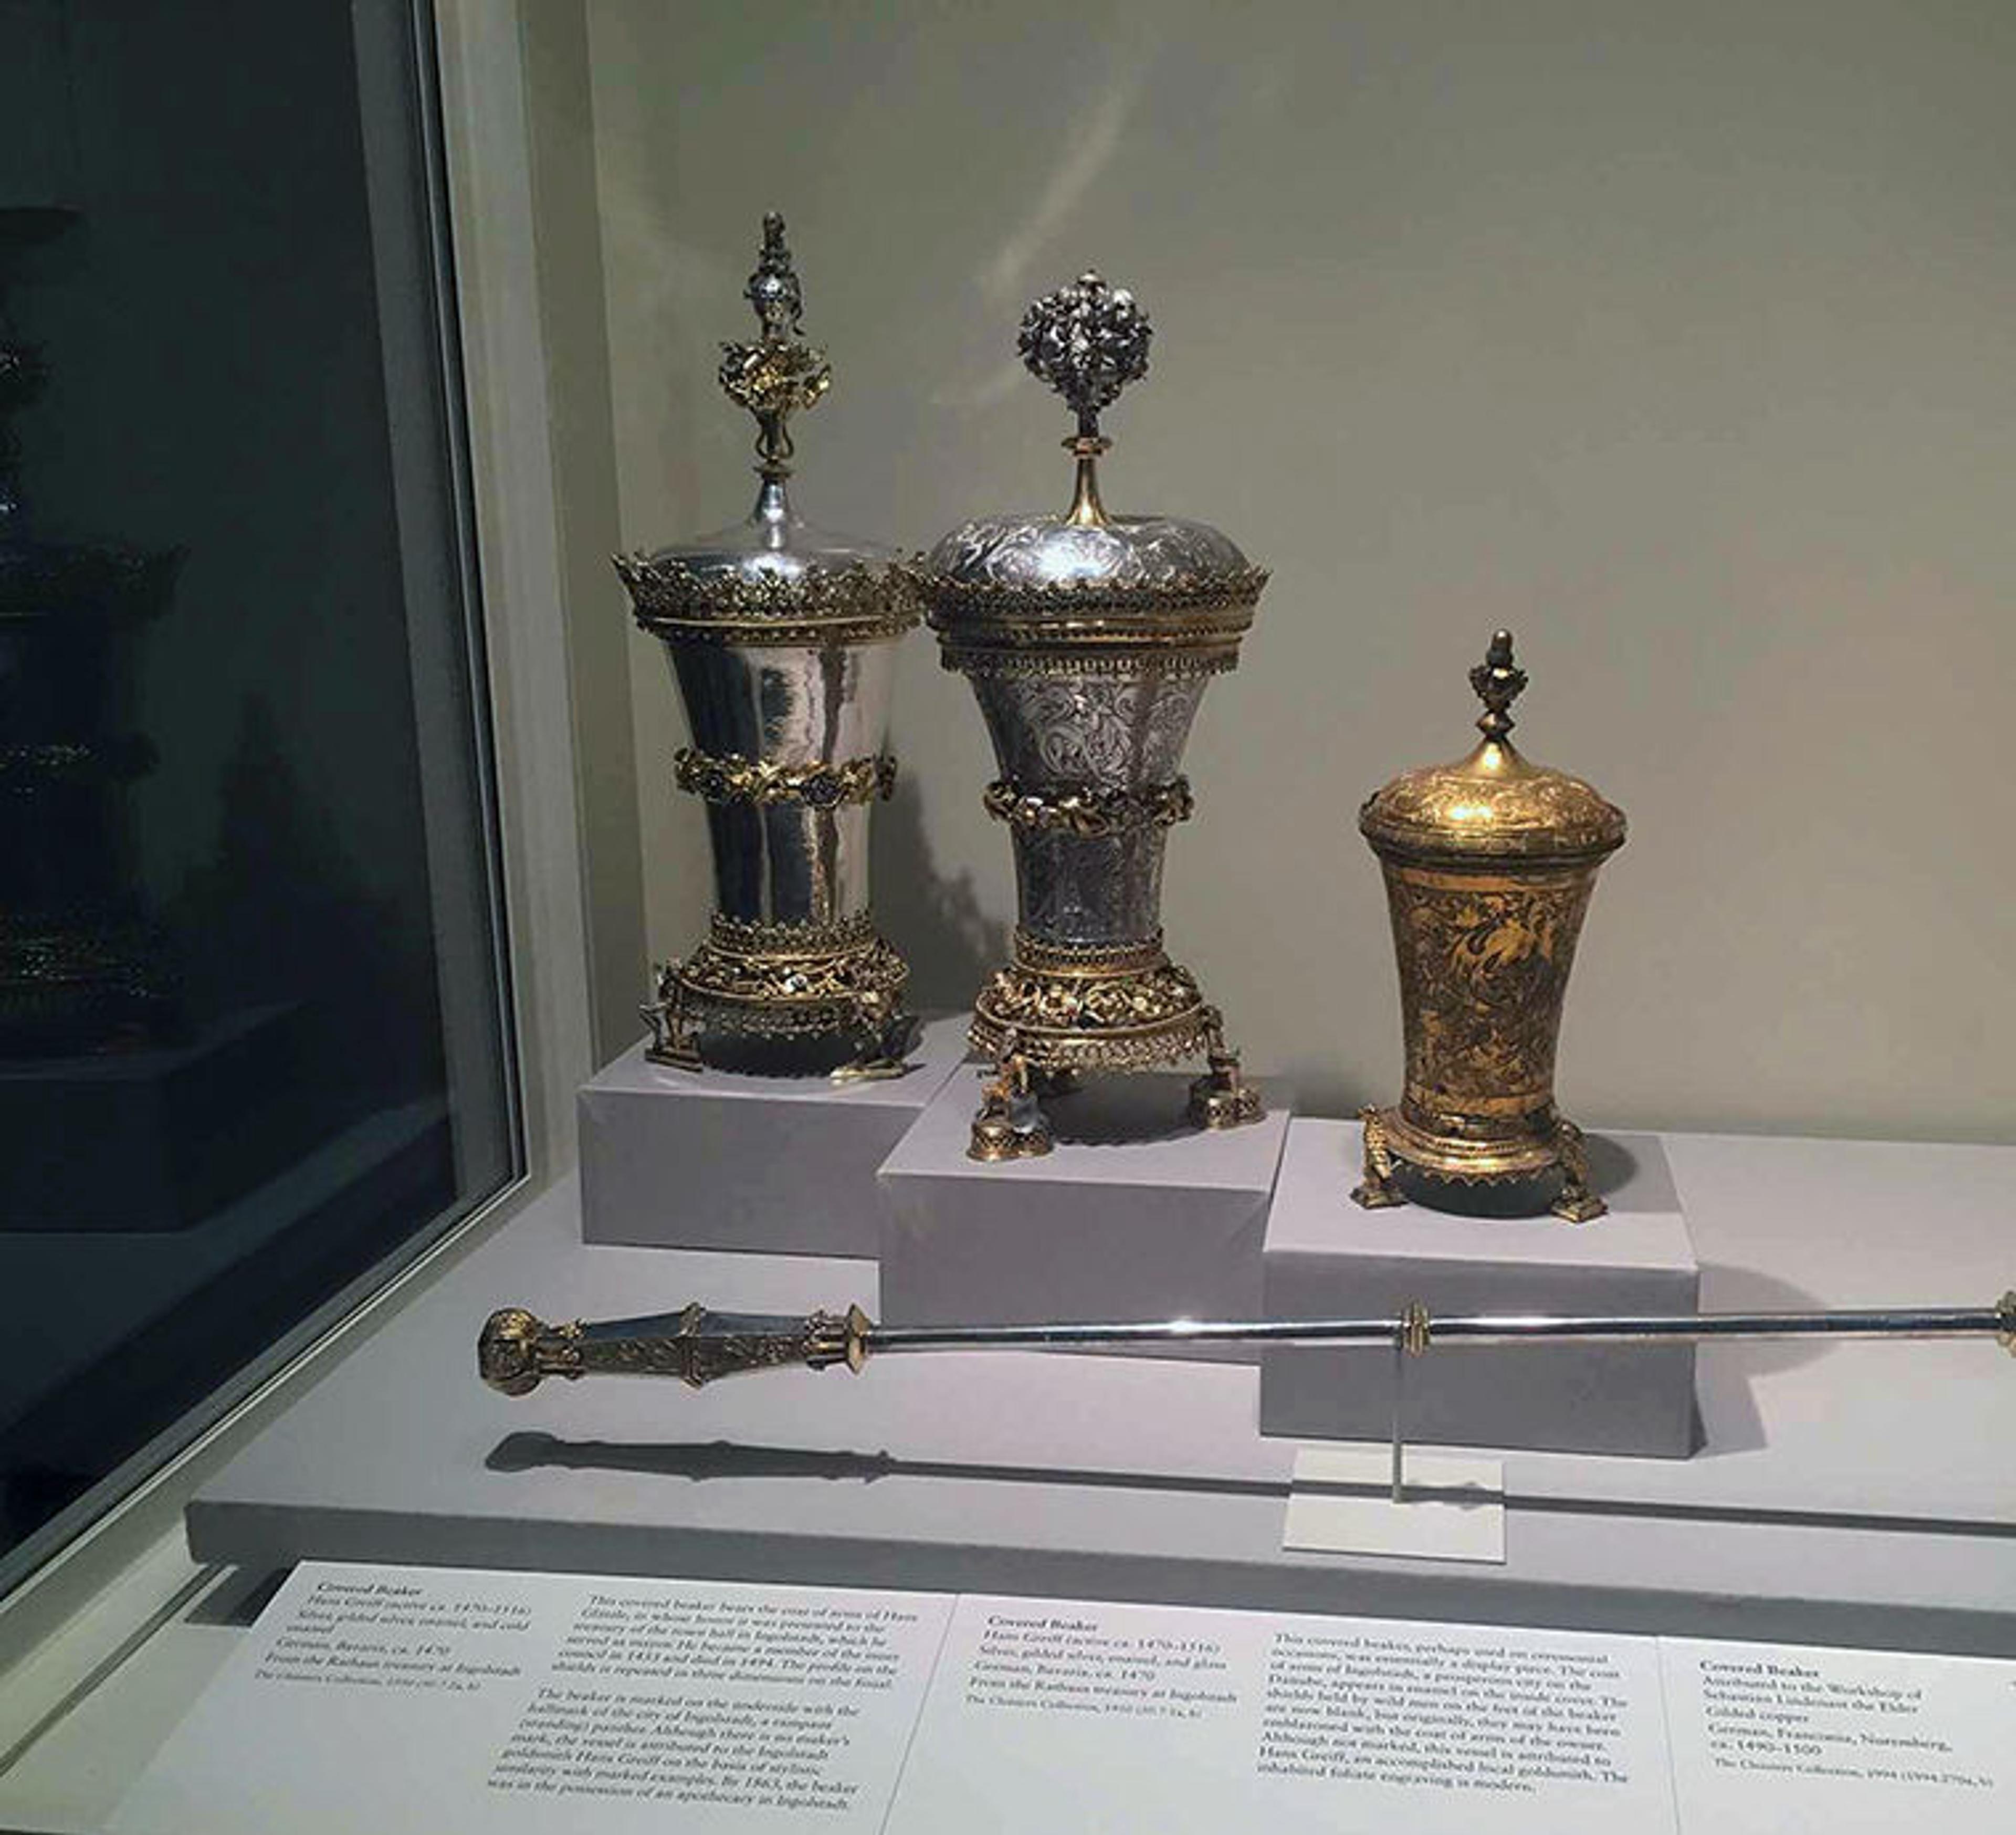 Display of medieval beakers at the Cloisters